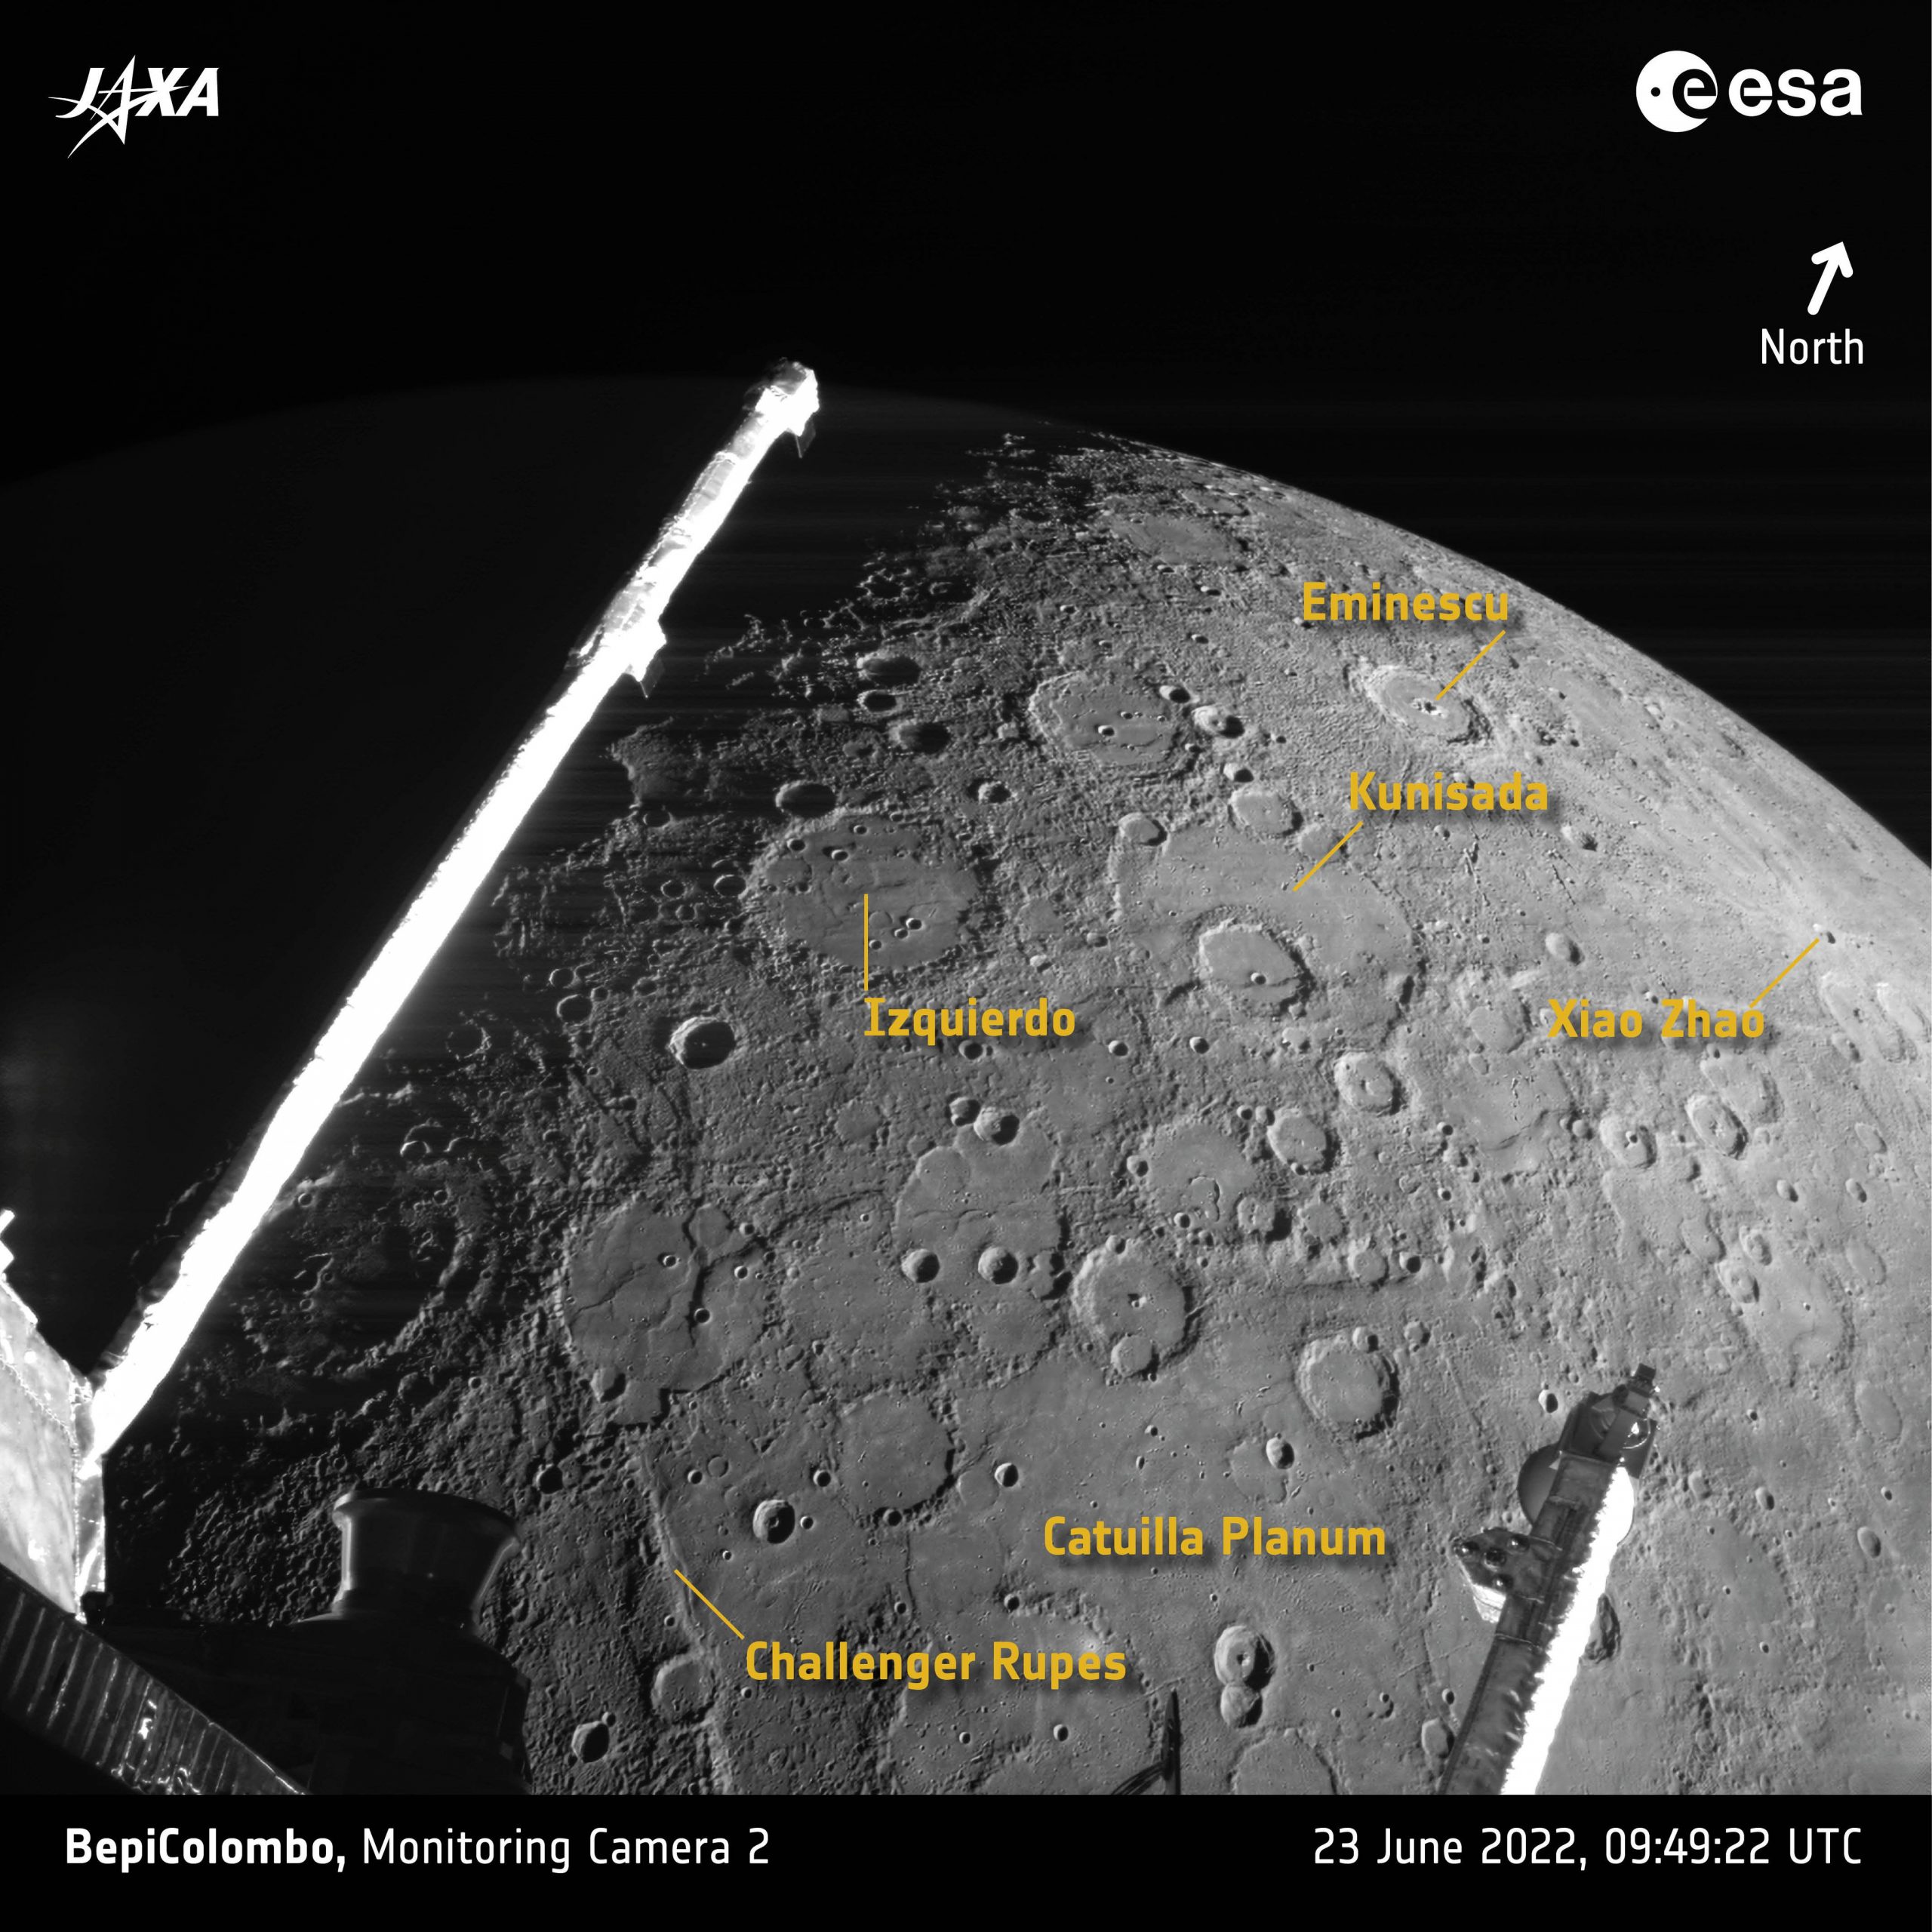 A photograph taken by the Bepicolombo spacecraft showing some of the craters on Mercury and their respective names. Image Credit: ESA/BepiColombo/MTM, CC BY-SA 3.0 IGO.